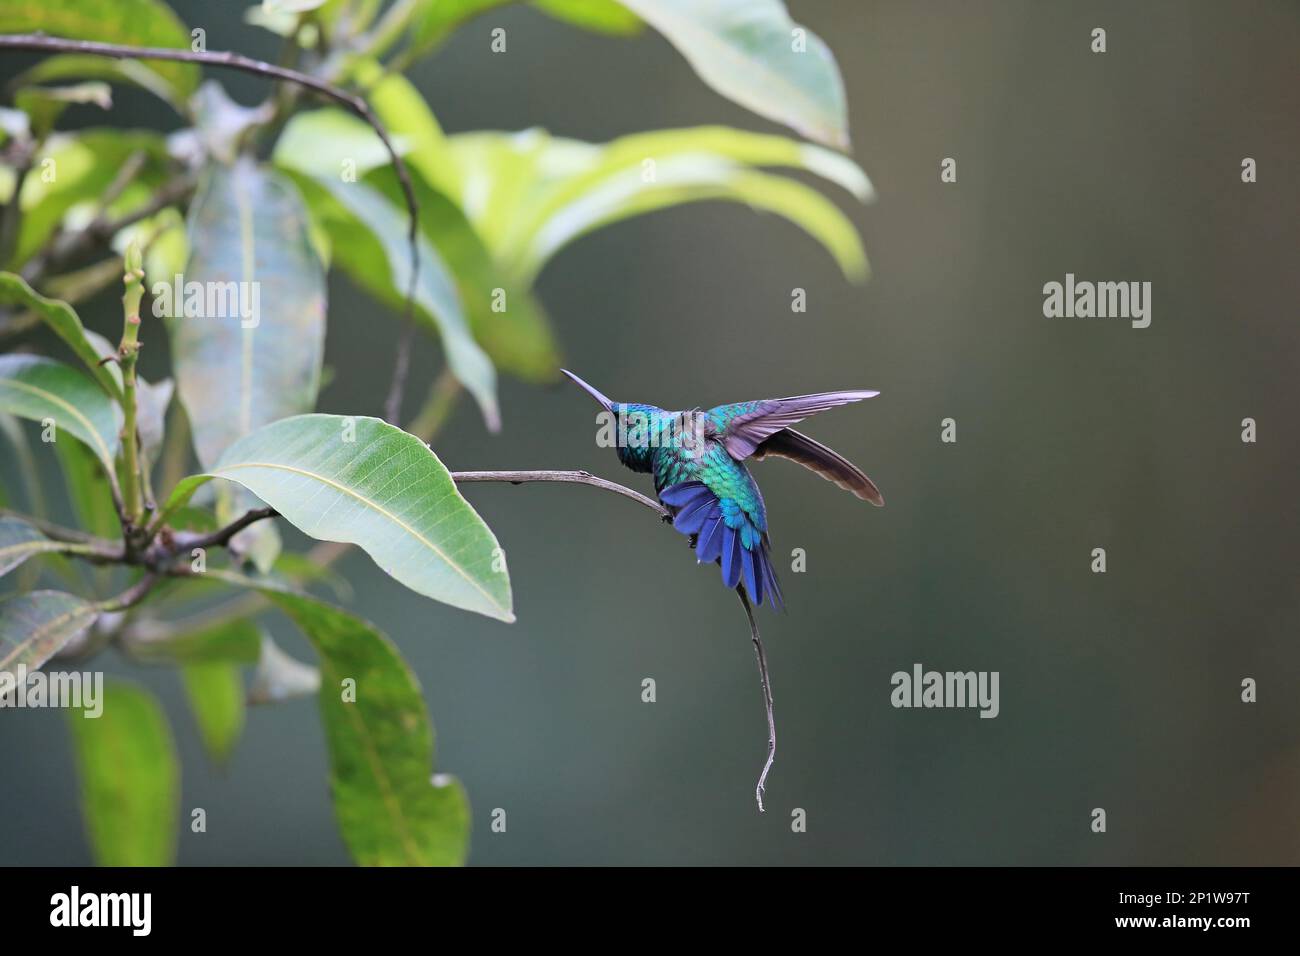 Blue-chinned blue-chinned sapphire (Chlorestes notatus) adult wing and tail streamer Asa wright Trinidad and Tobago April 2016 Stock Photo